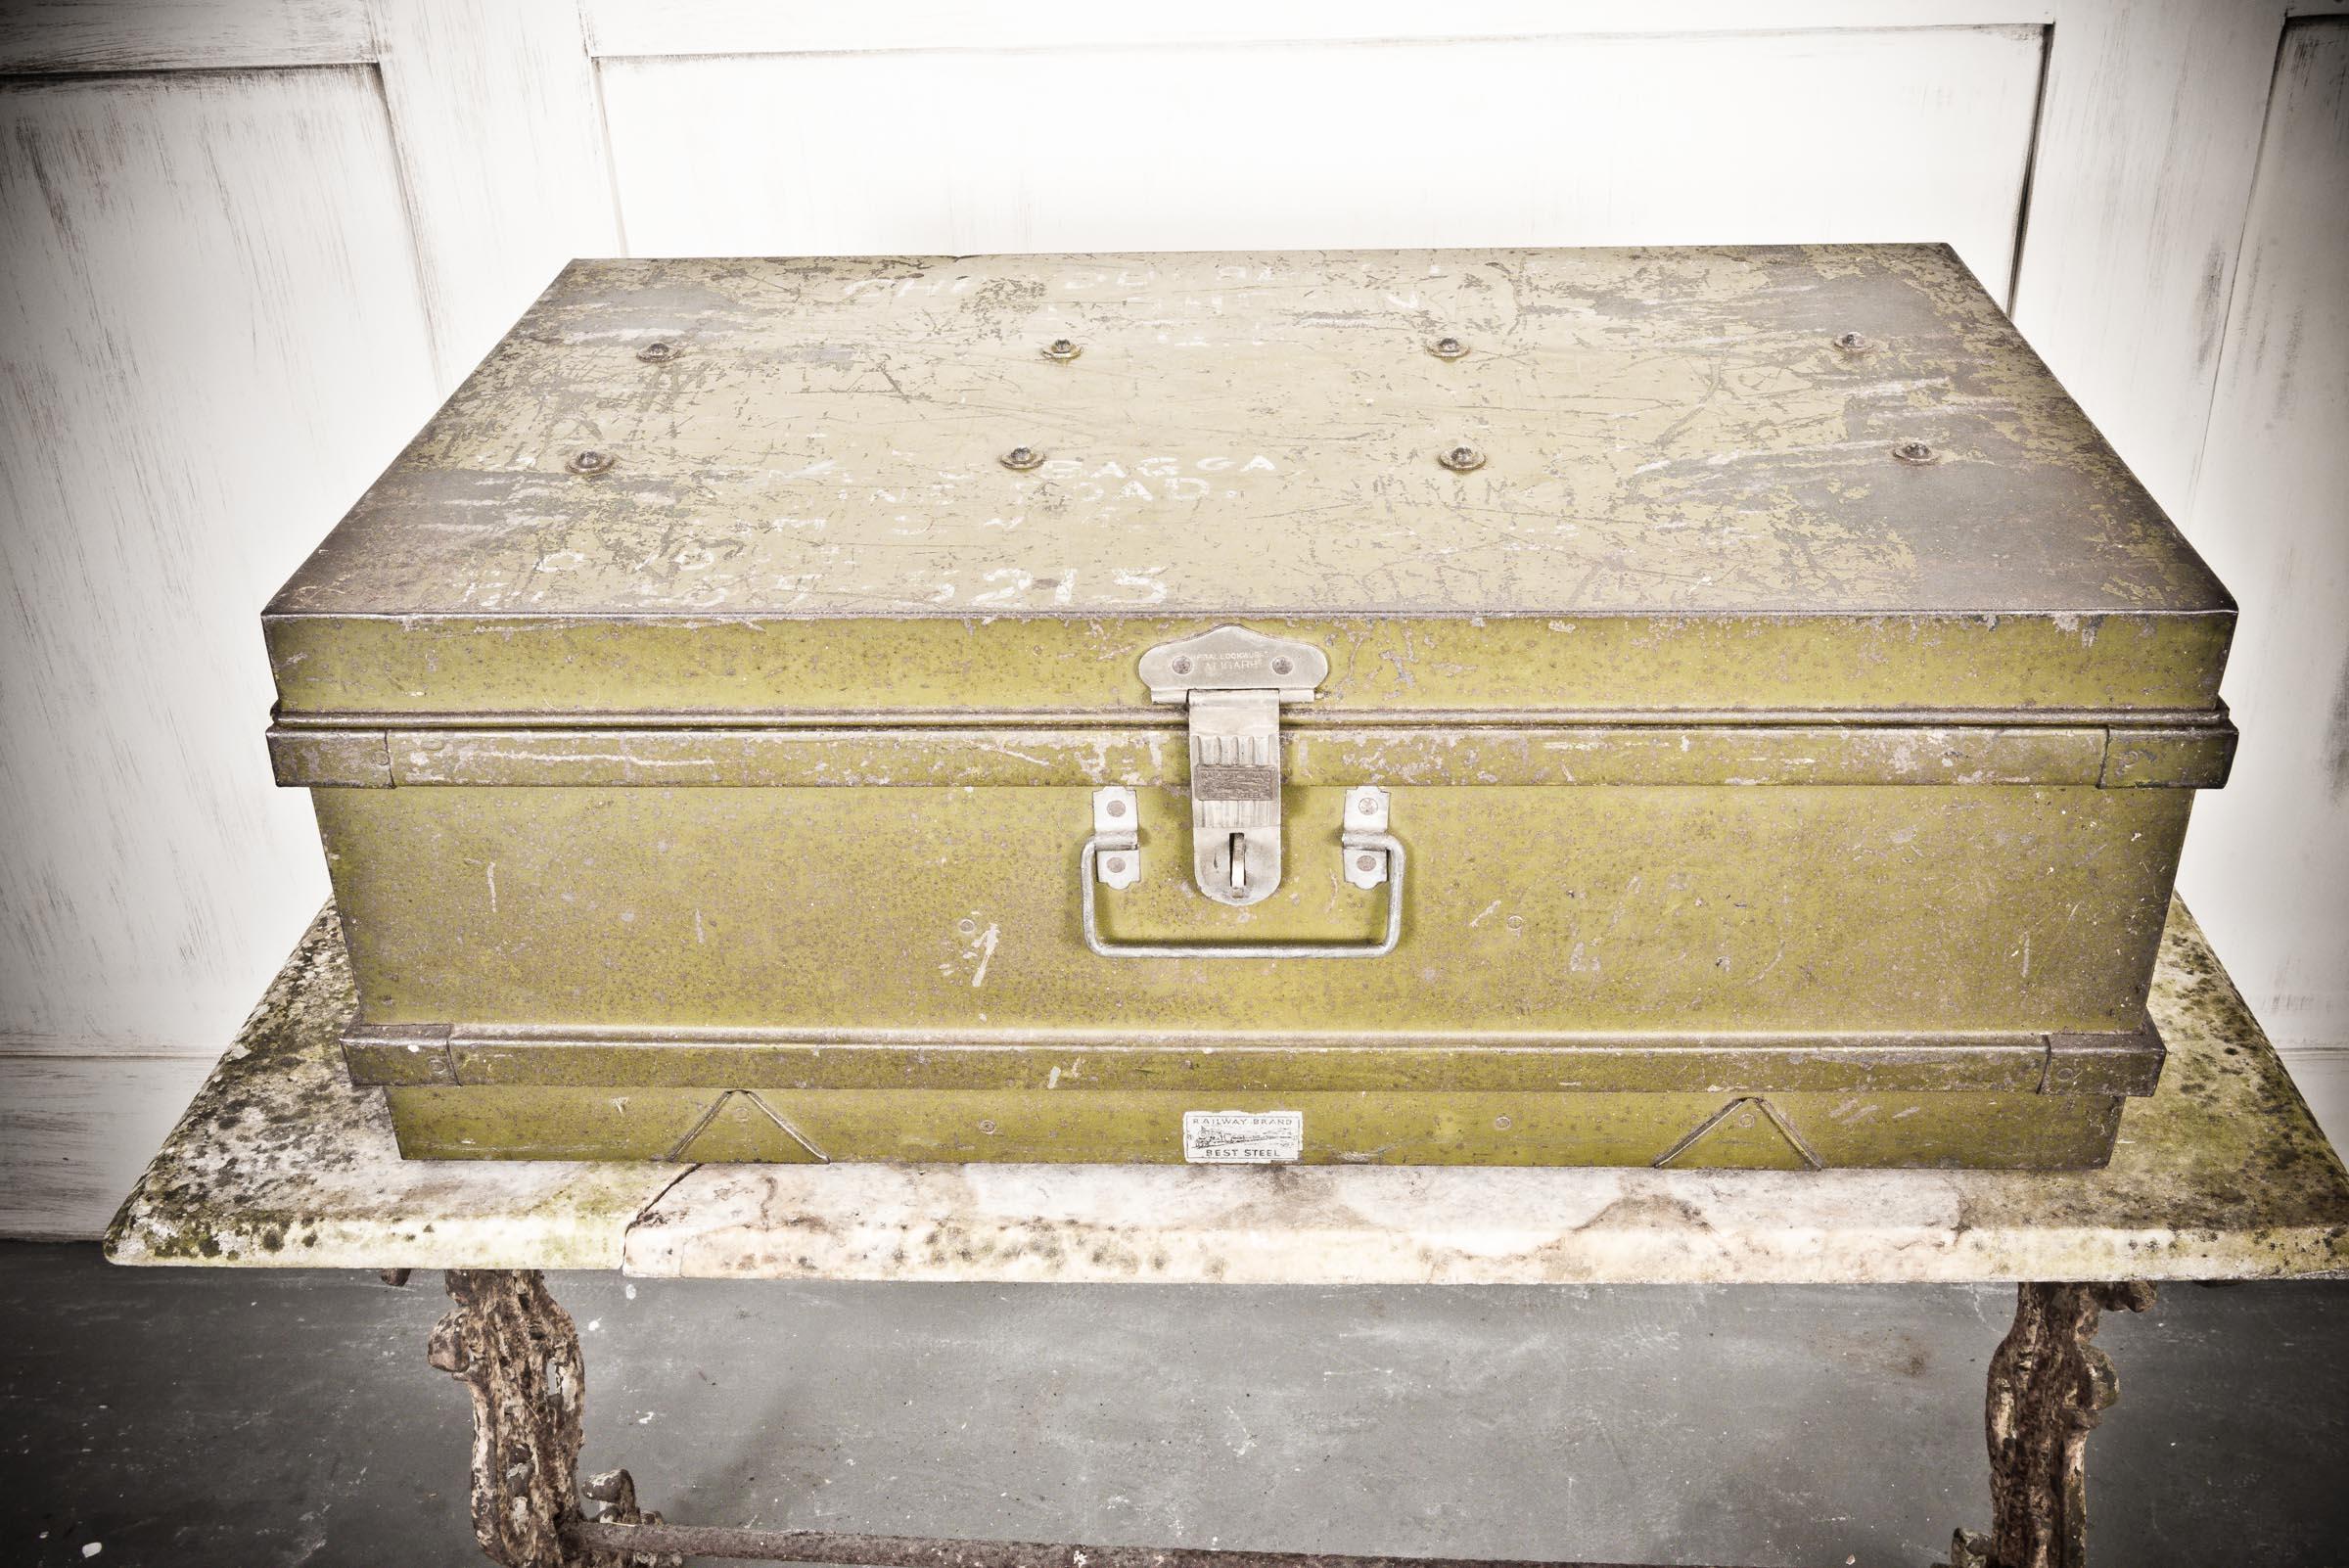 Olive green in colour, this metal travel box originating in India from the thirties has a studded top with two small handles either side for ease of transportation. The box also has two company stickers 